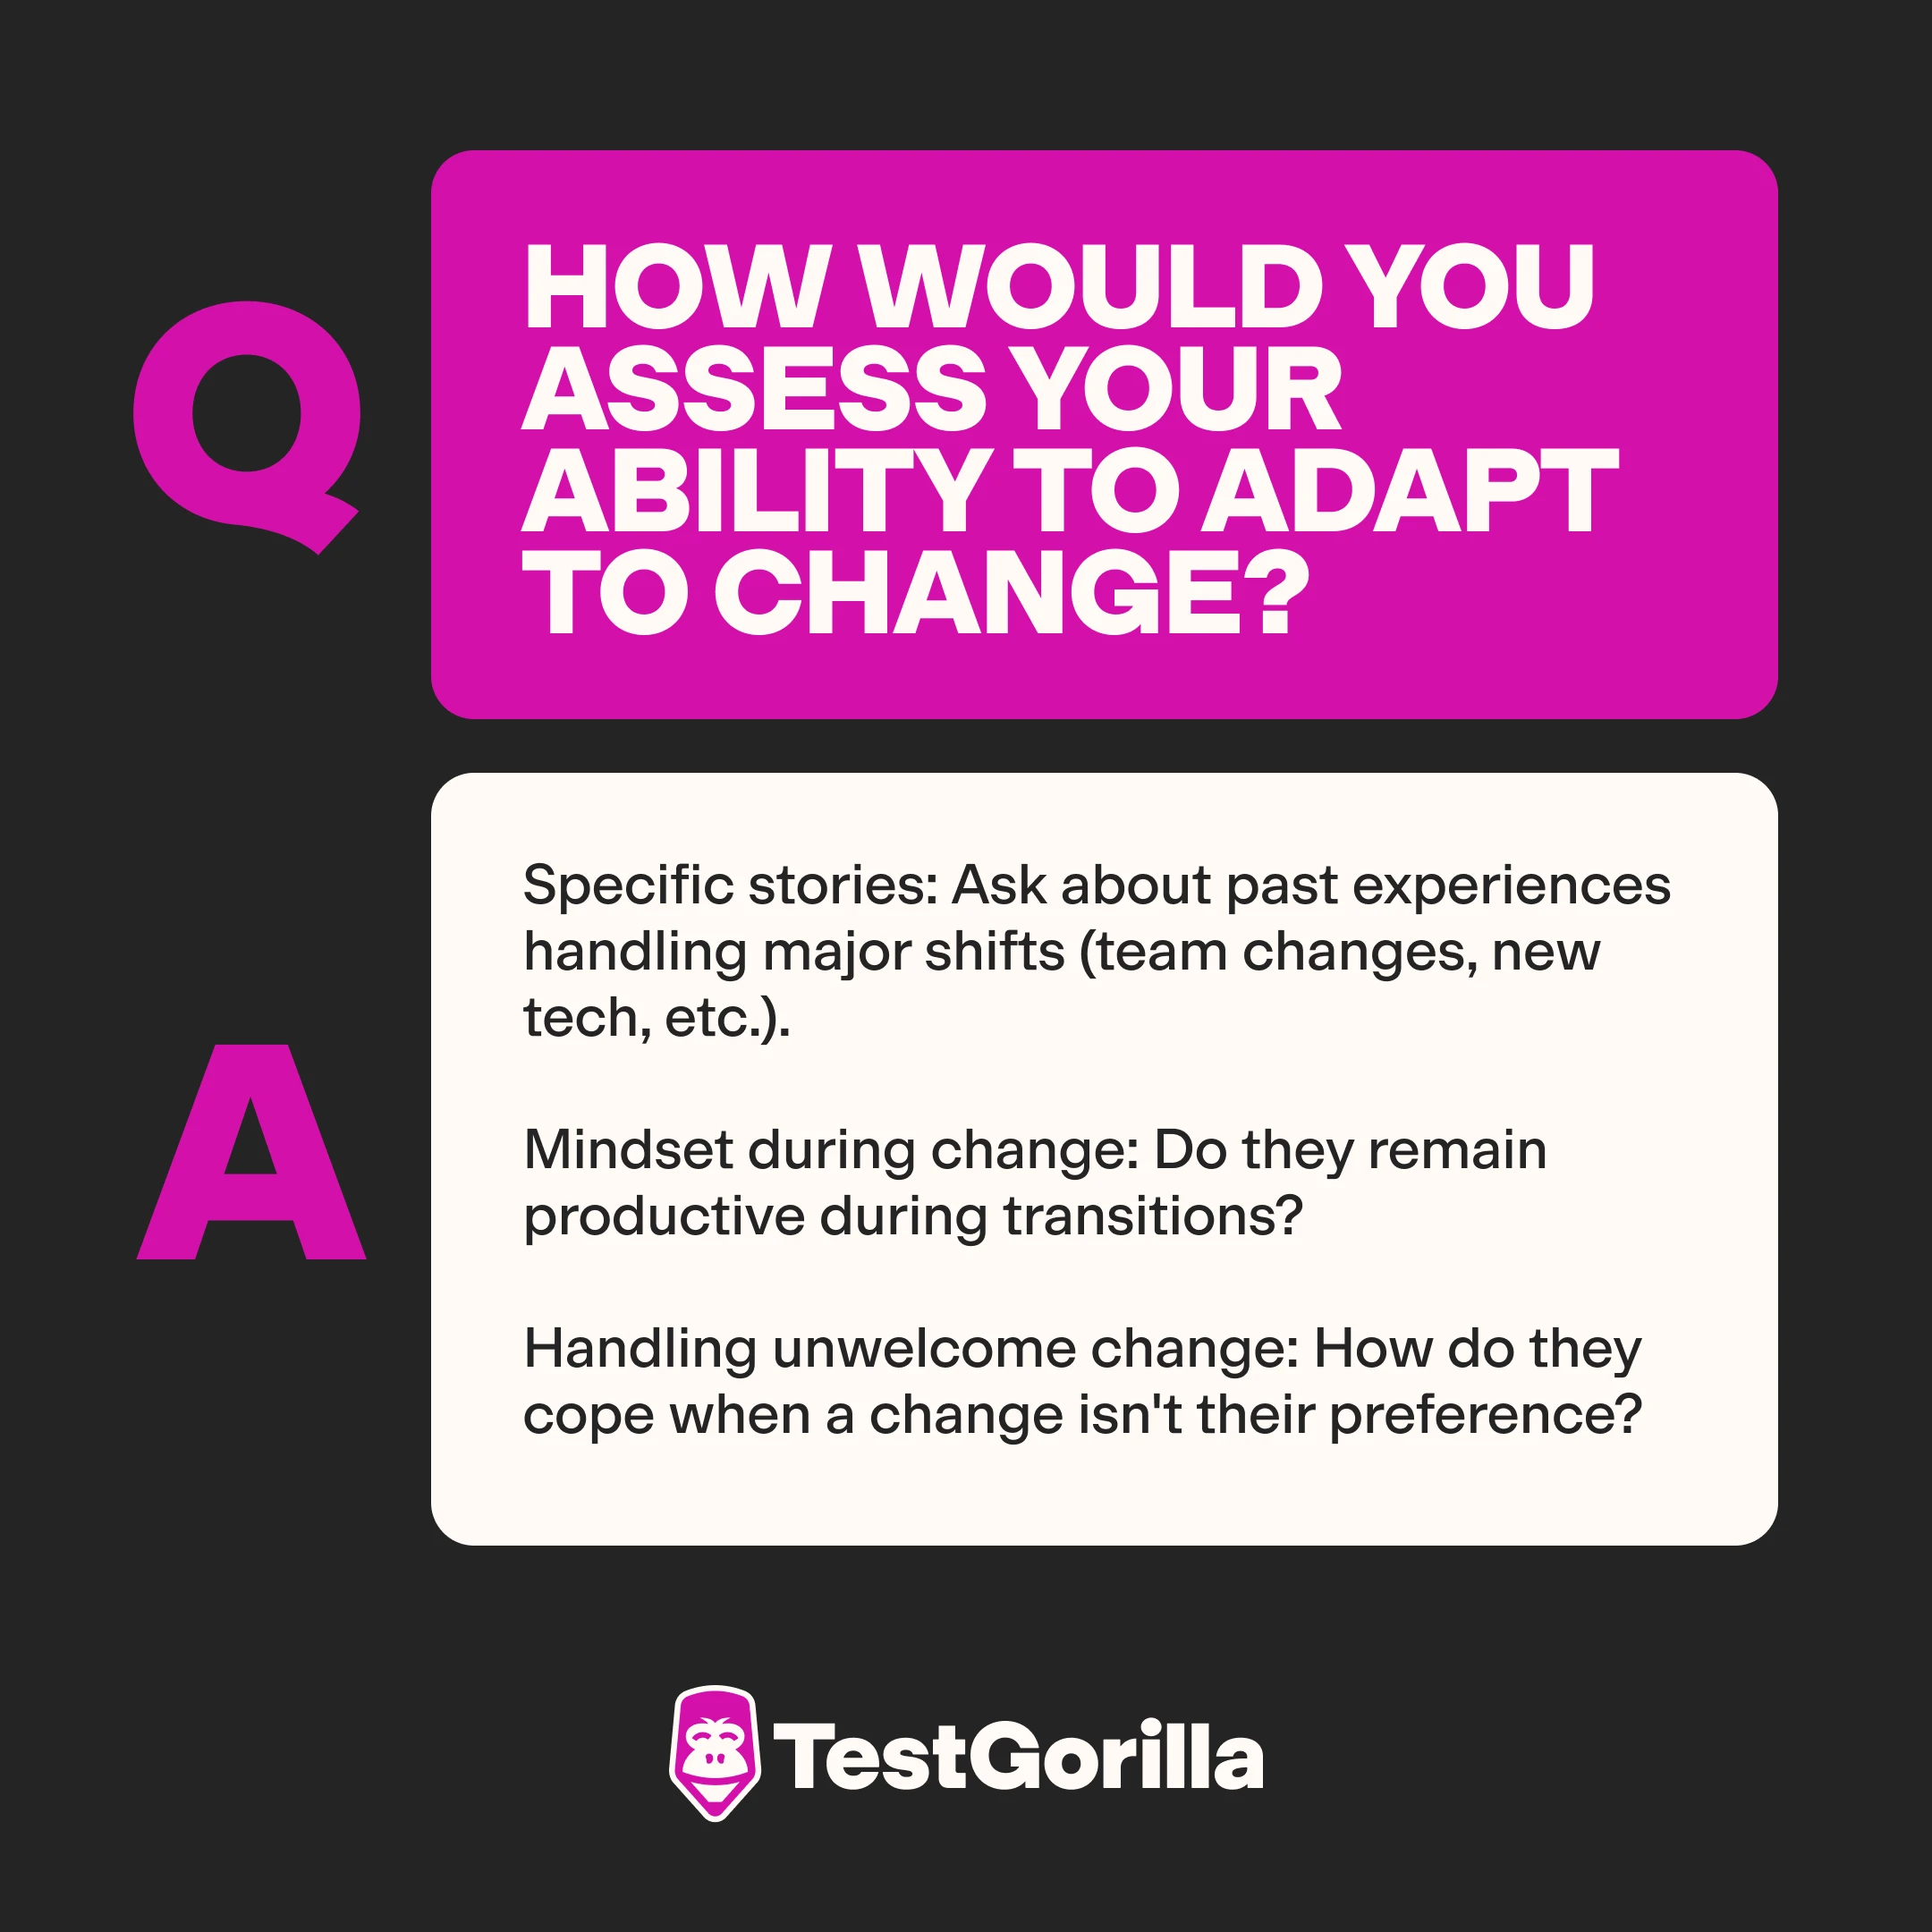 How would you assess your ability to adapt to change?
